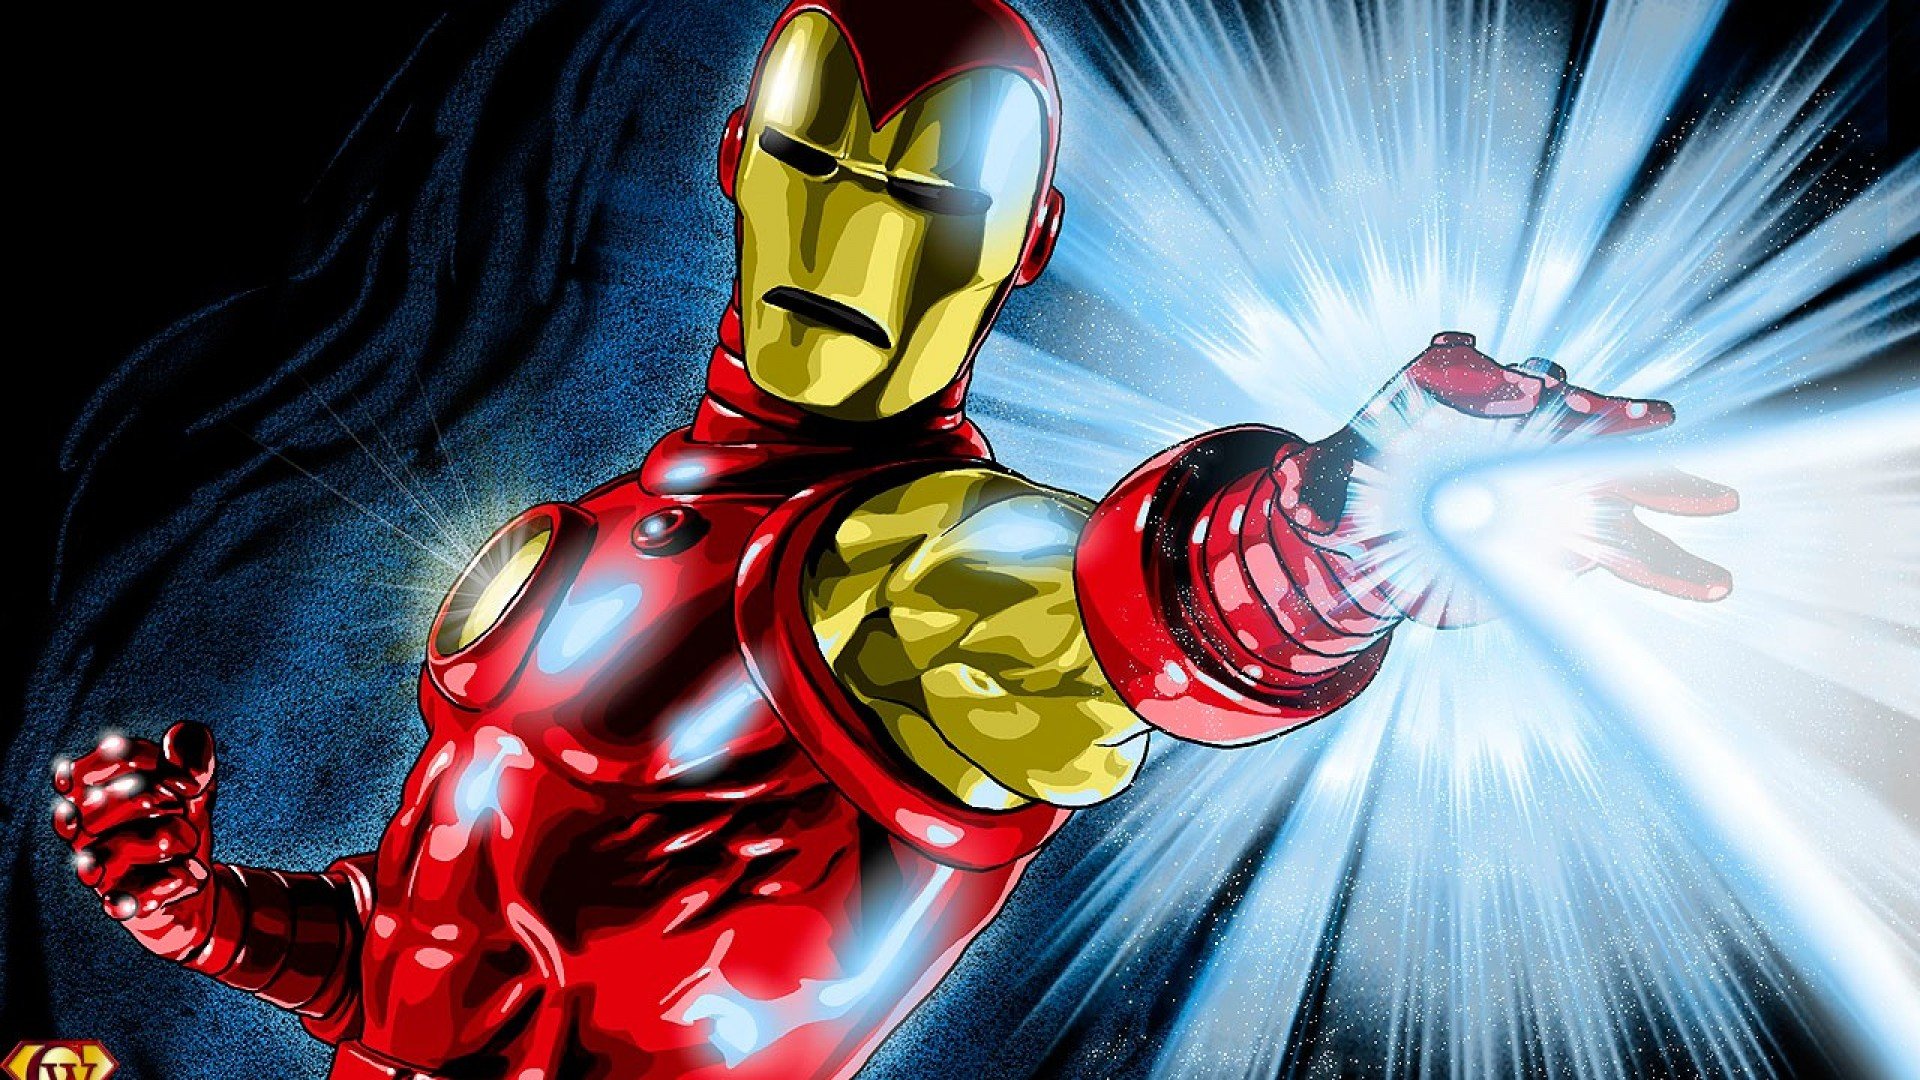 Download full hd 1920x1080 Iron Man comics computer background ID:322748 for free